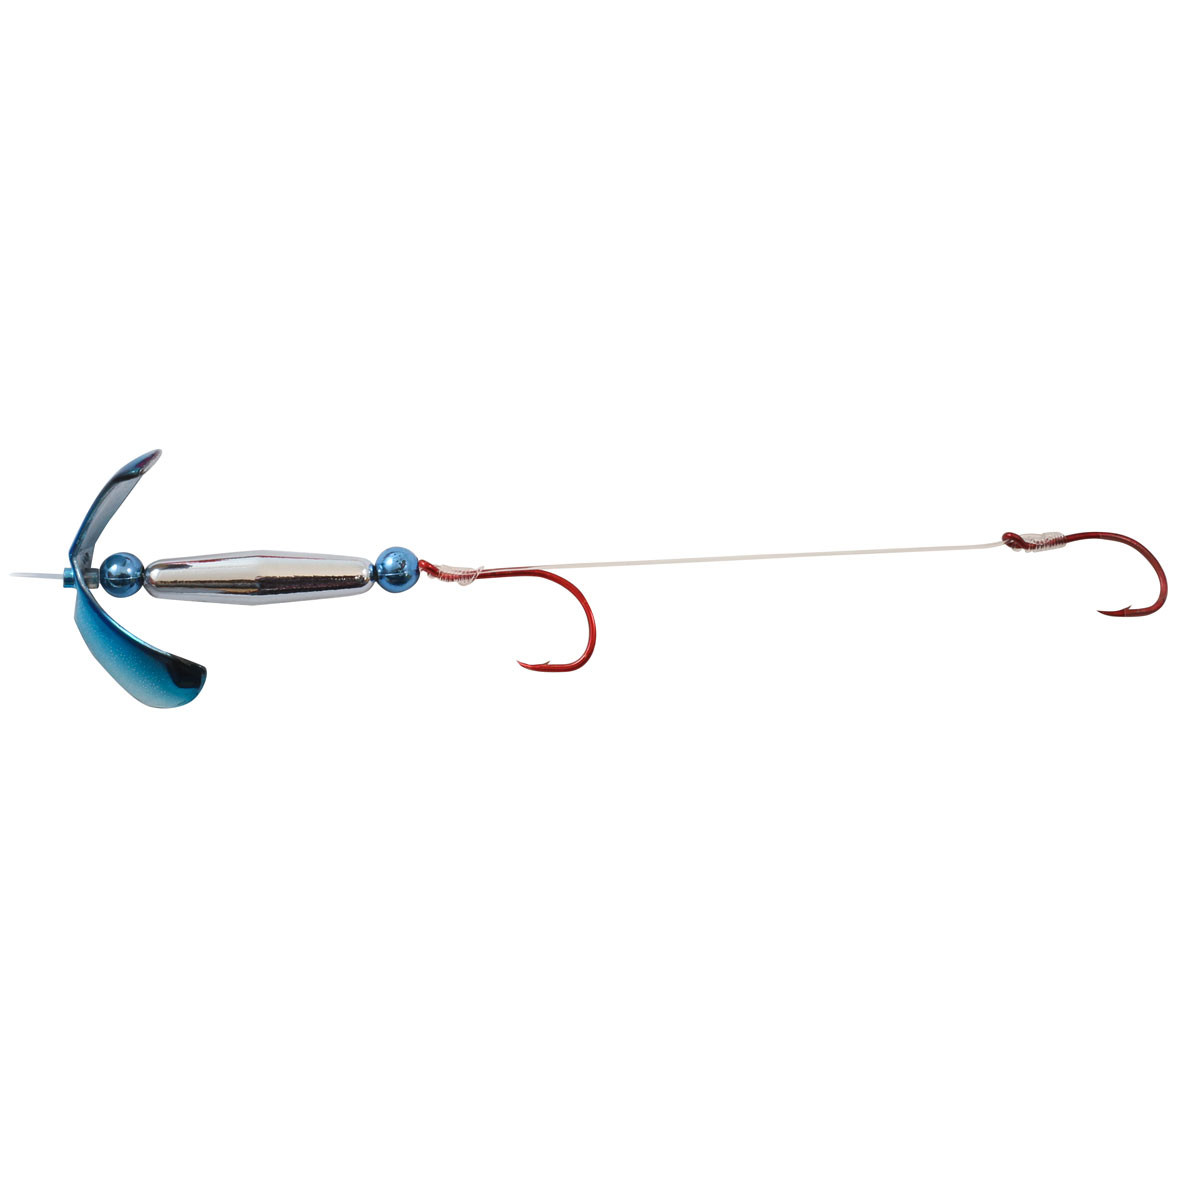 Northland Butterfly Blade Float'n Harness | Blue Shiner; #1 | FishUSA